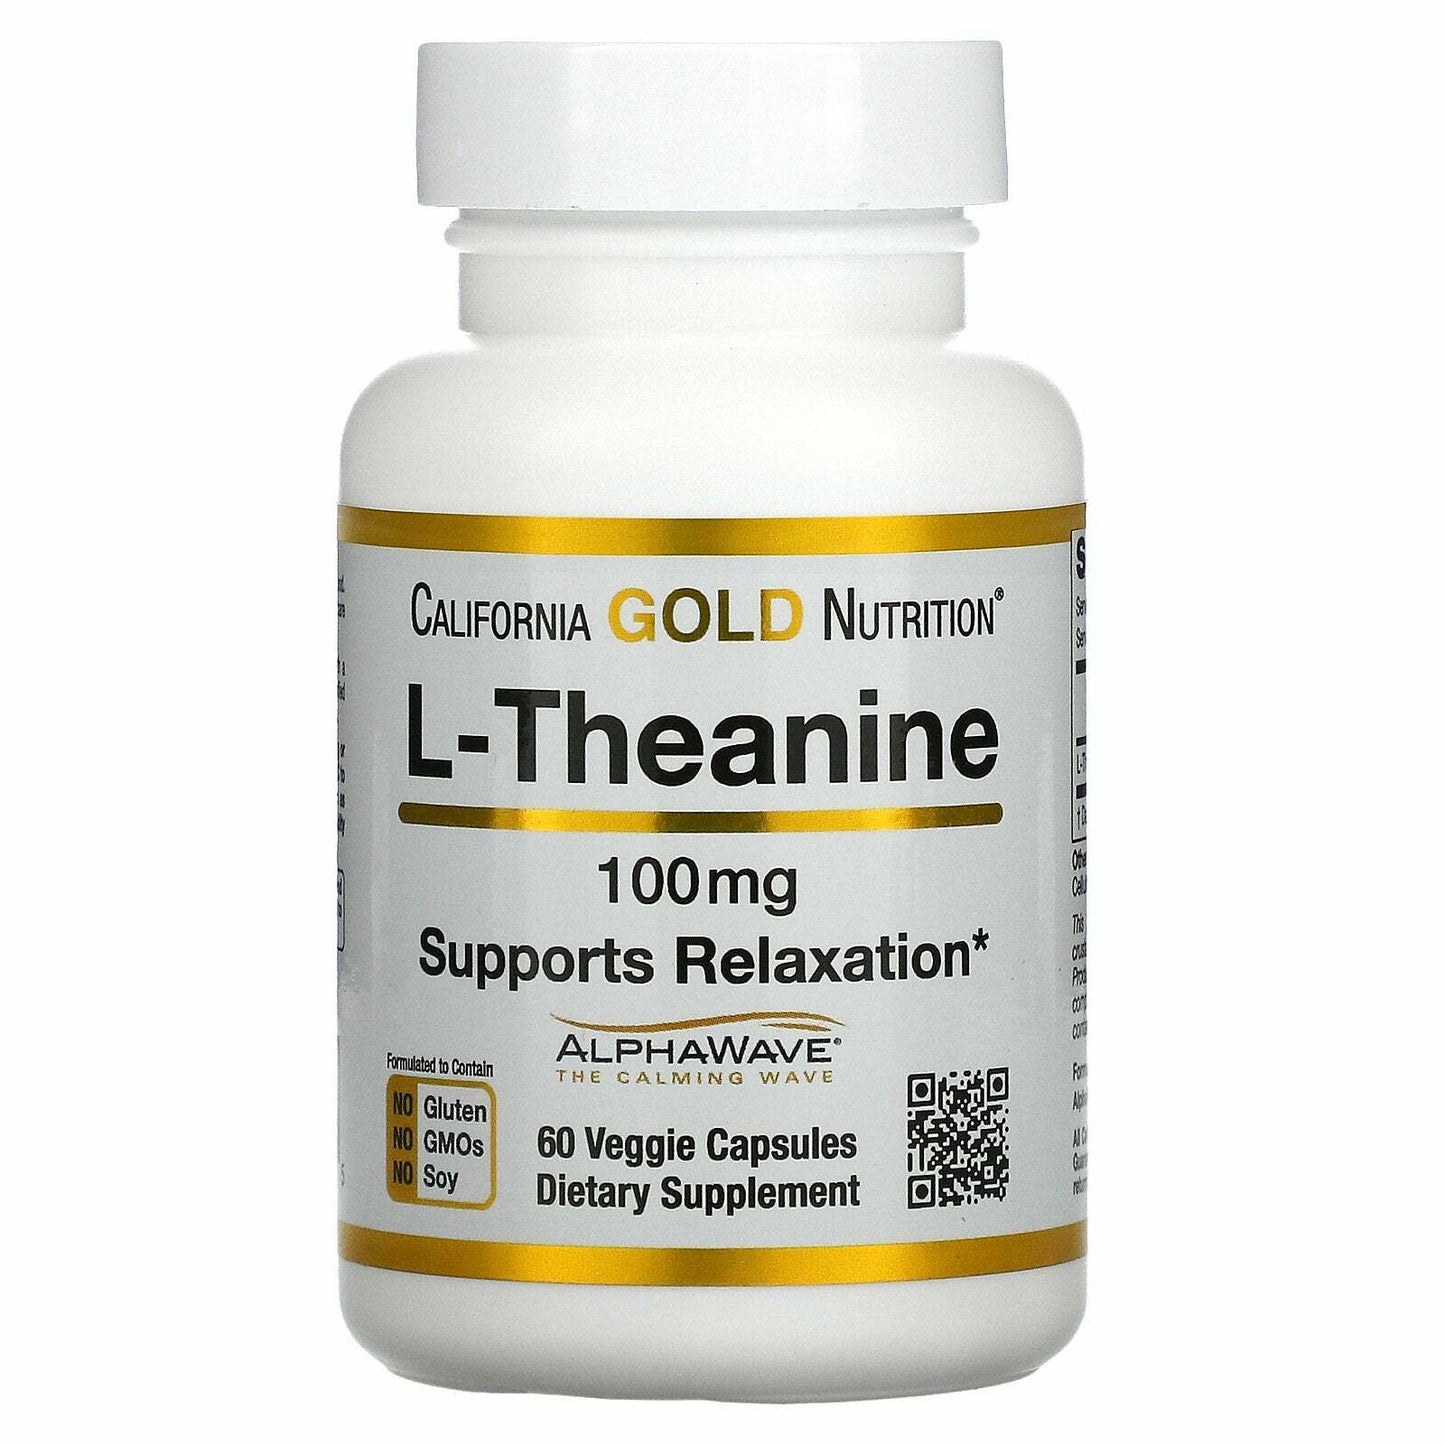 California Gold Nutrition L-Theanine AlphaWave Relaxation Calm 100mg 60 Caps NEW